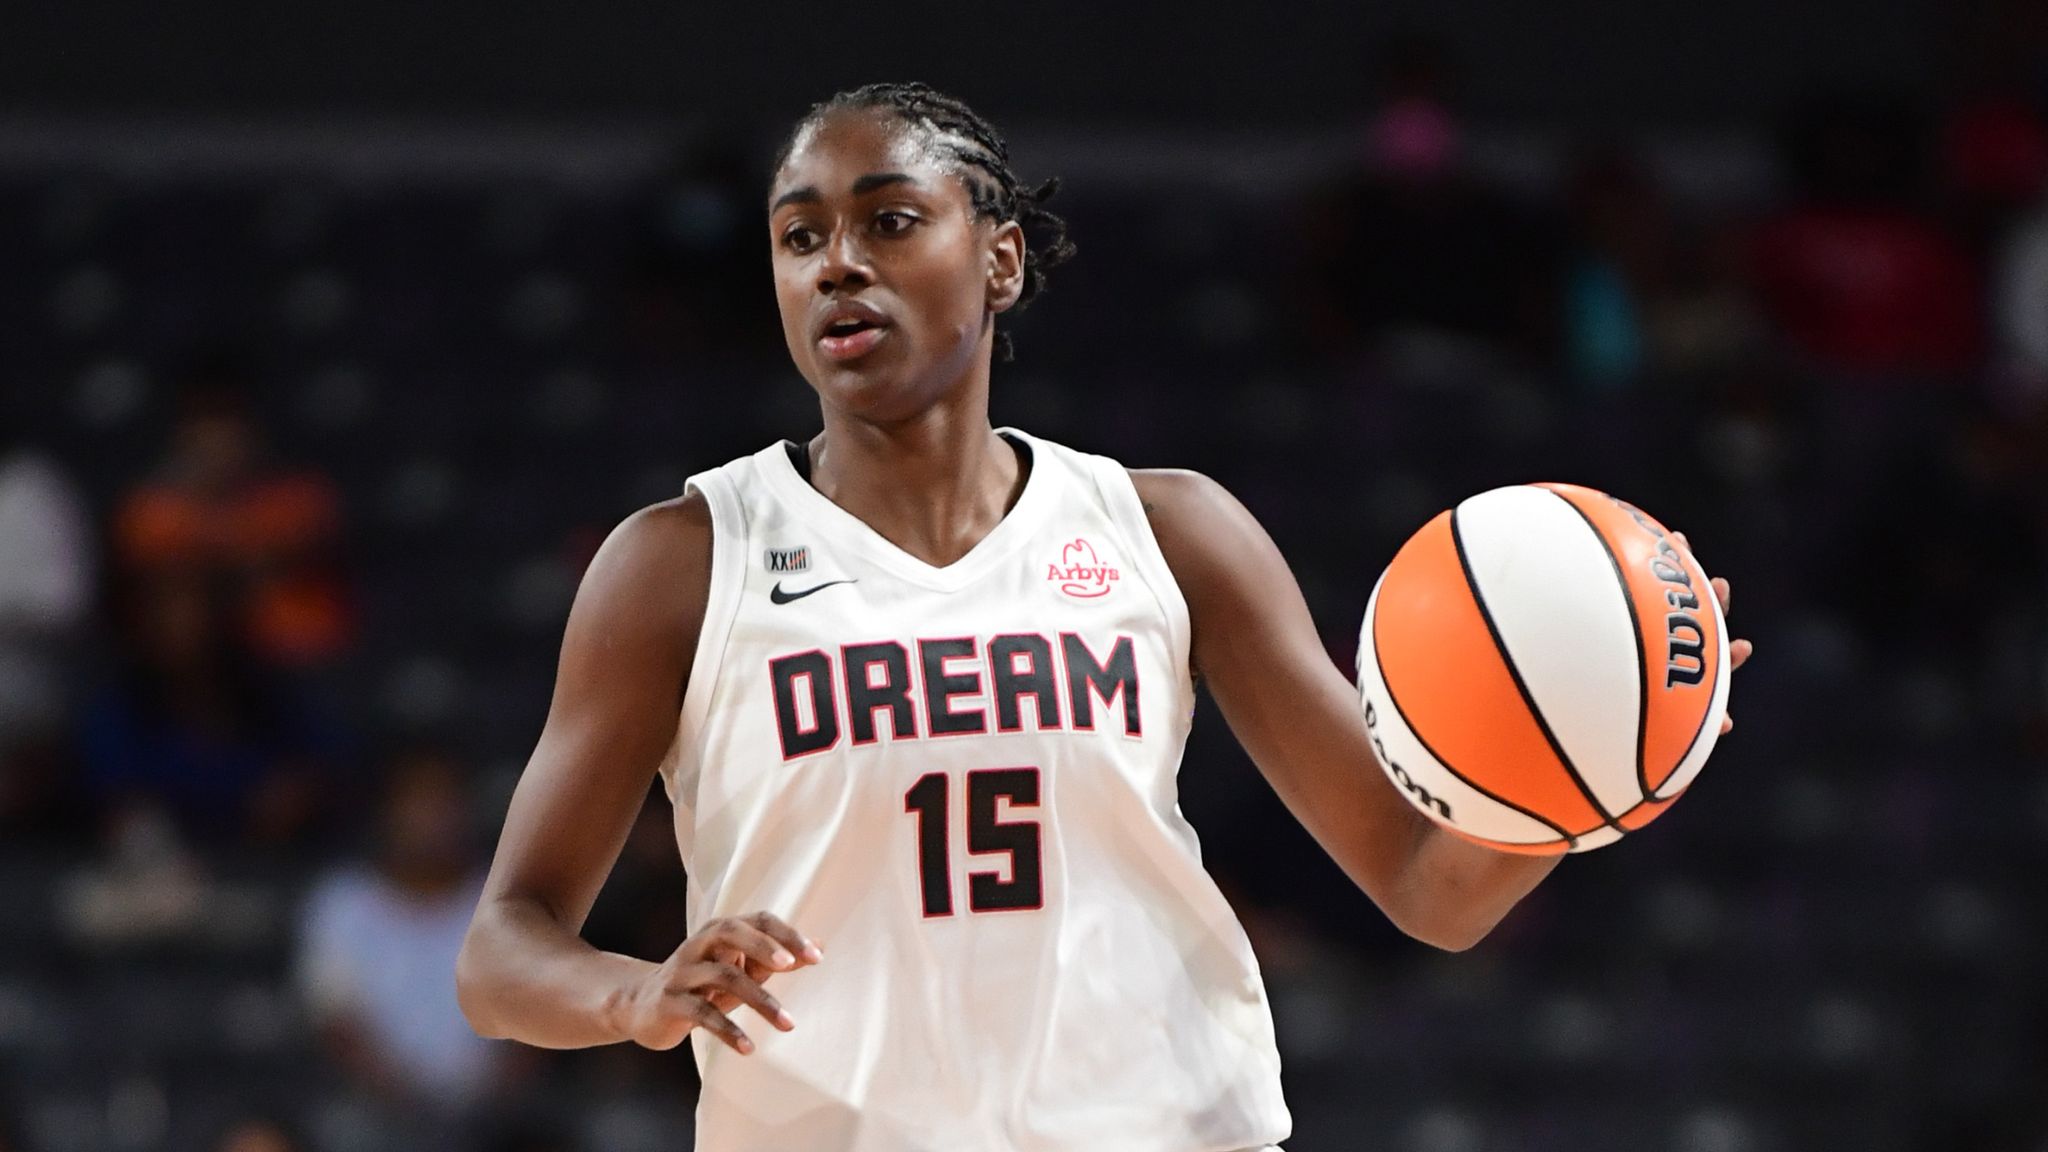 In the W: After Last Year's Wubble, Atlanta Dream Works With 3